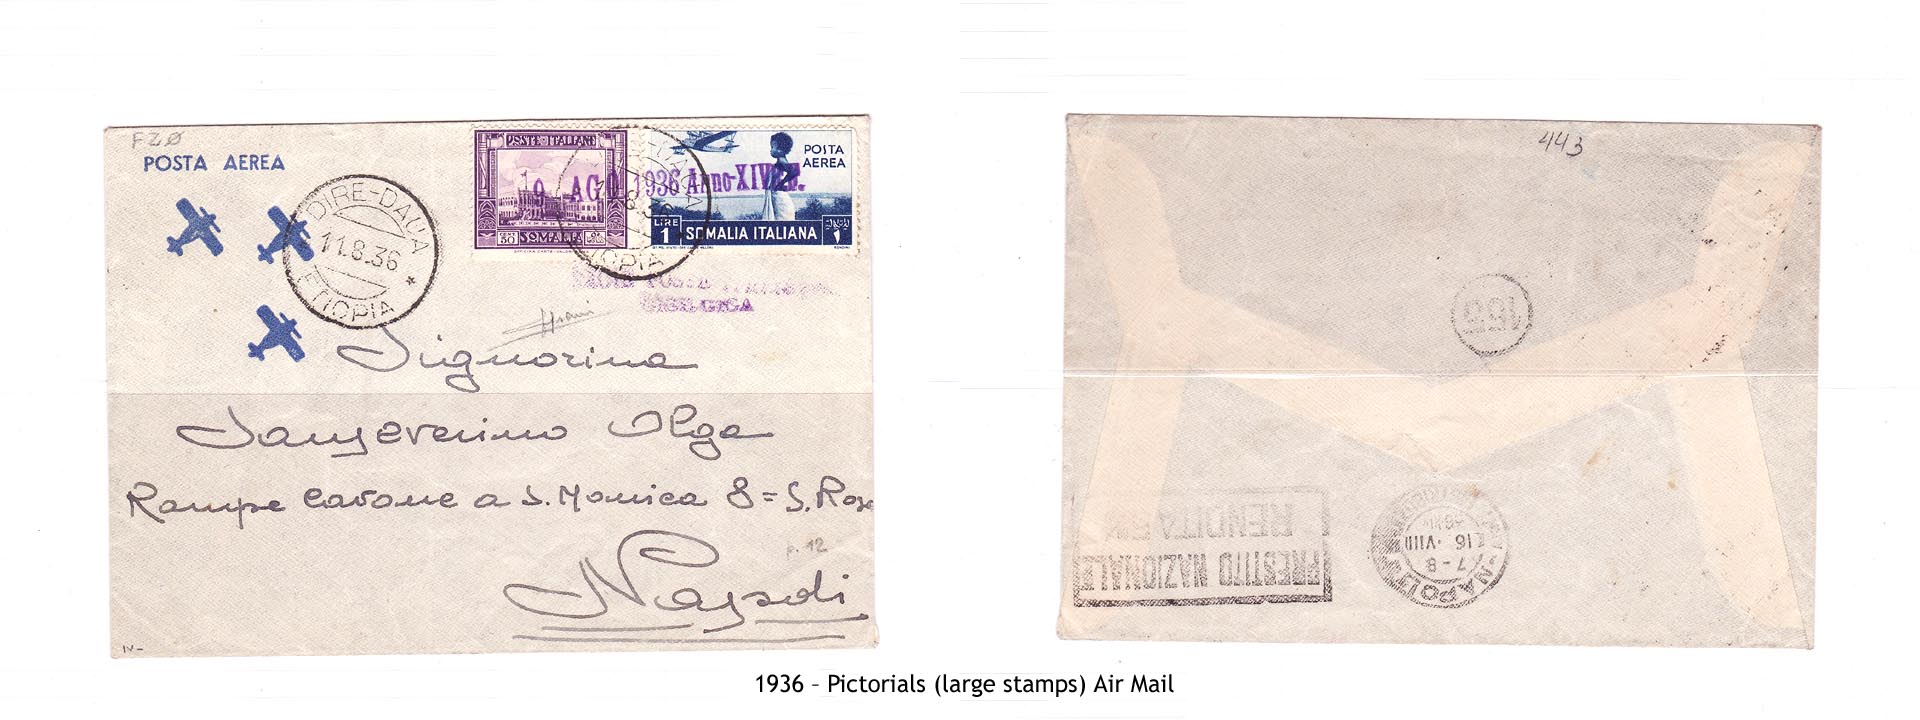 1936 – Somalia pictorials (large stamps) Air Mail